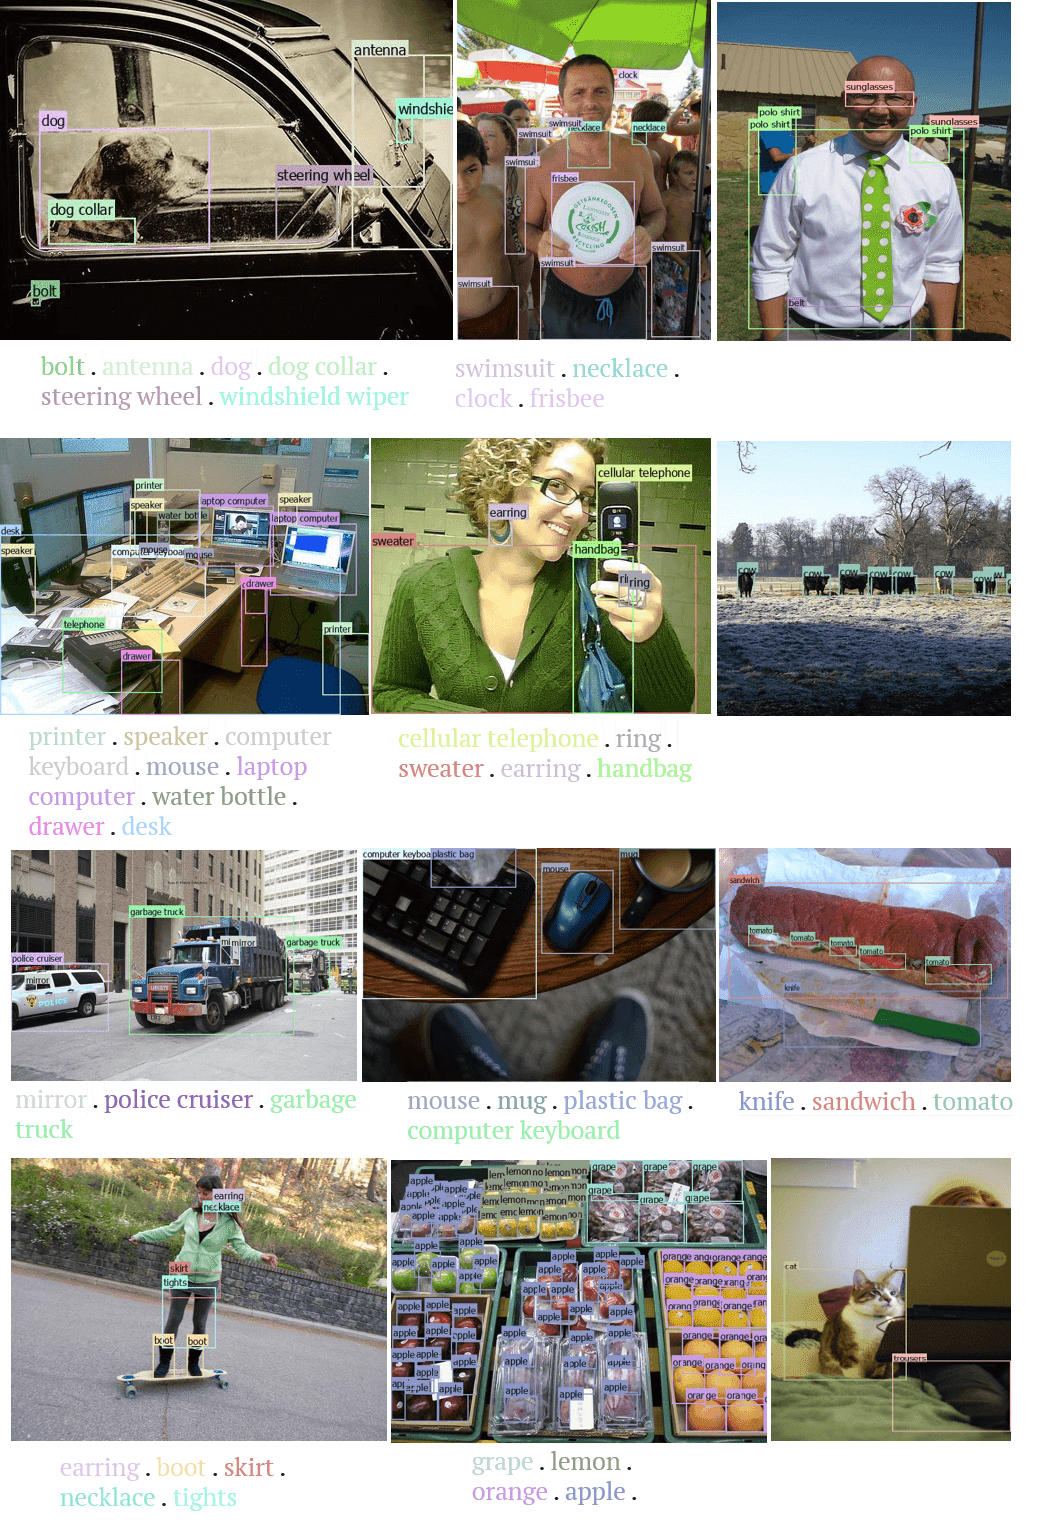 DINO 1.5 is smarter and faster at object detection